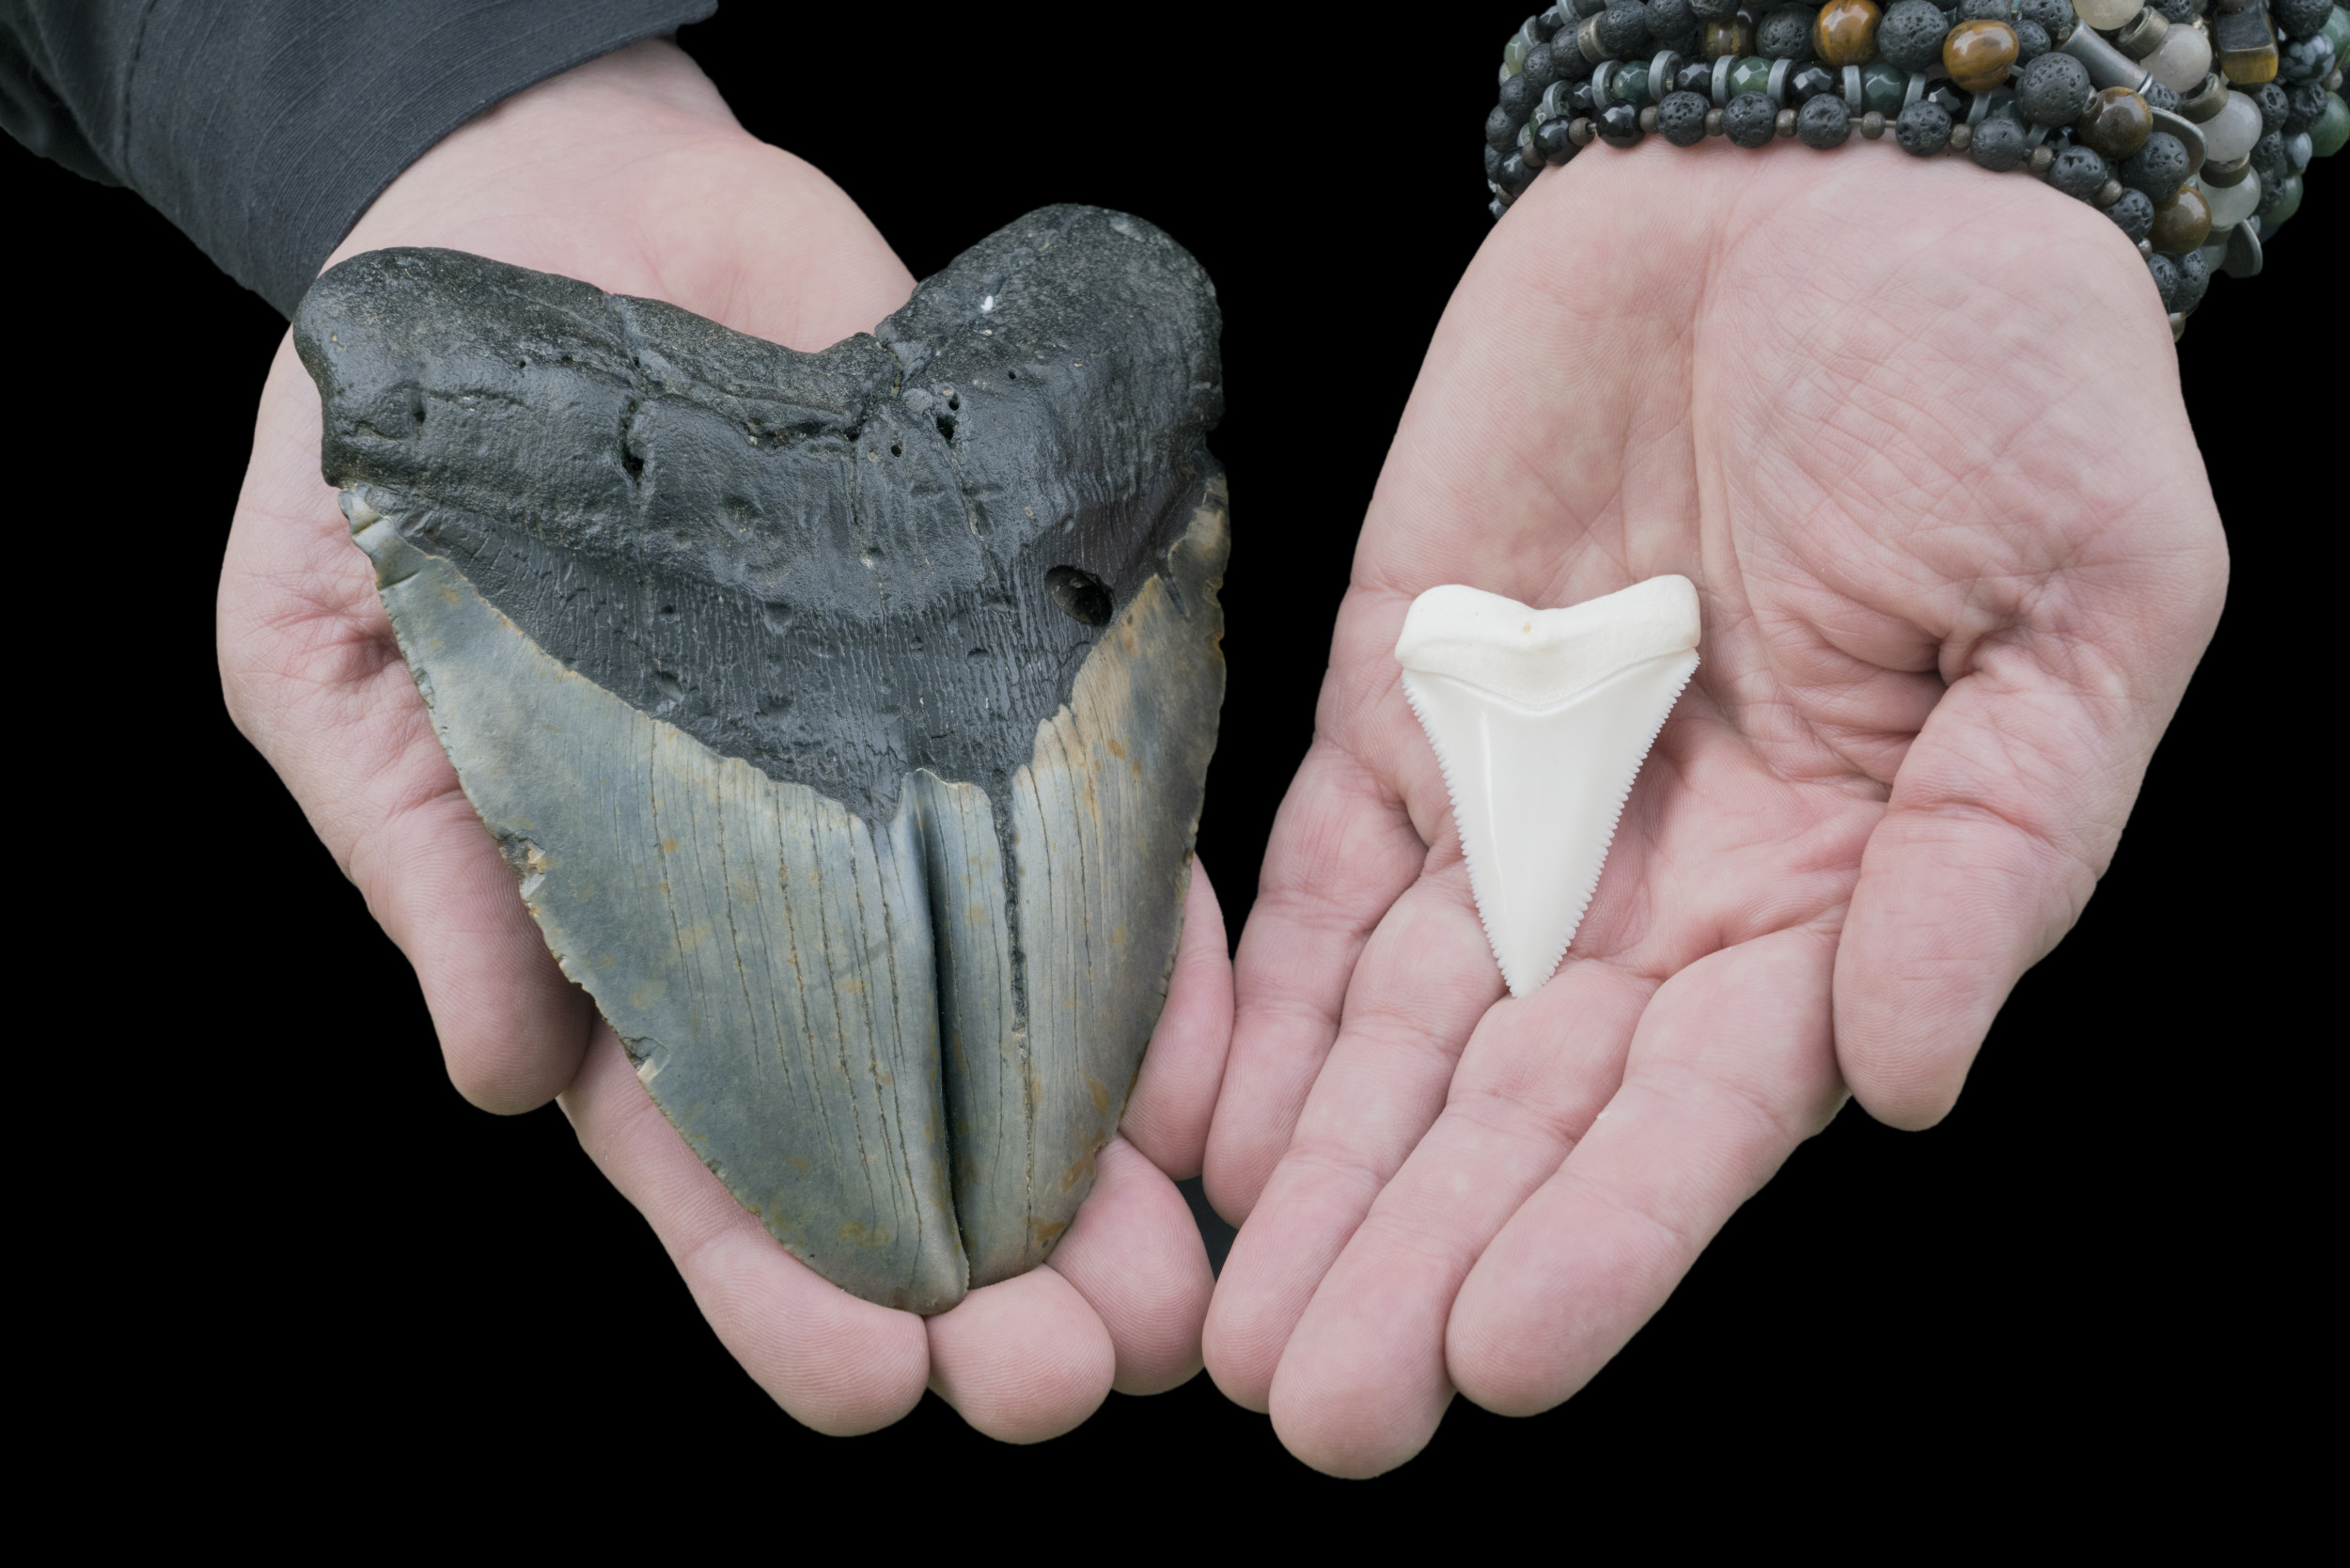 Huge tooth of megaldon, biggest shark to ever live, found on beach.